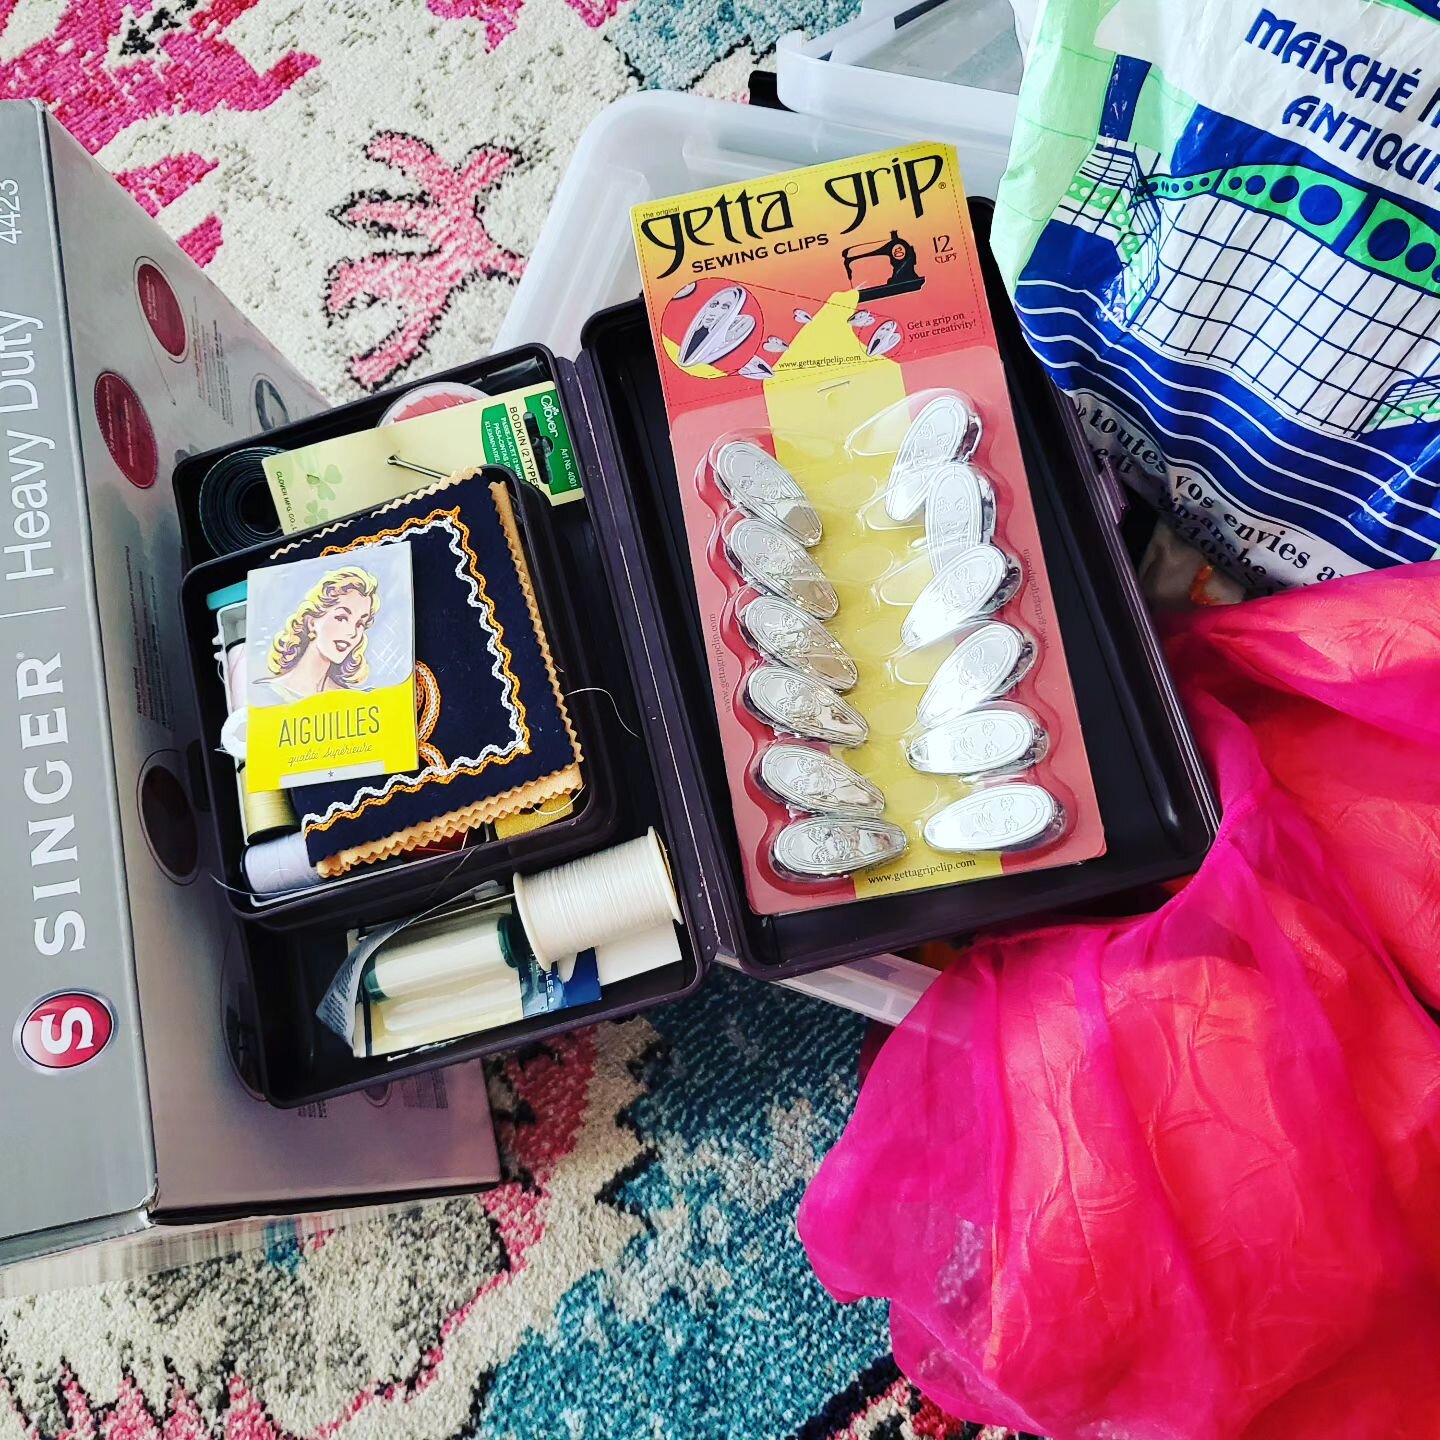 On the road to sew &amp; design my heart away with loved fashion professor, @bridgett.artise of @bornagainvintage

Here are some things I'm packing: clips, needles, thread, ribbons, trimmings, remnants, old clothes, and a head full of ideas. I'll be 